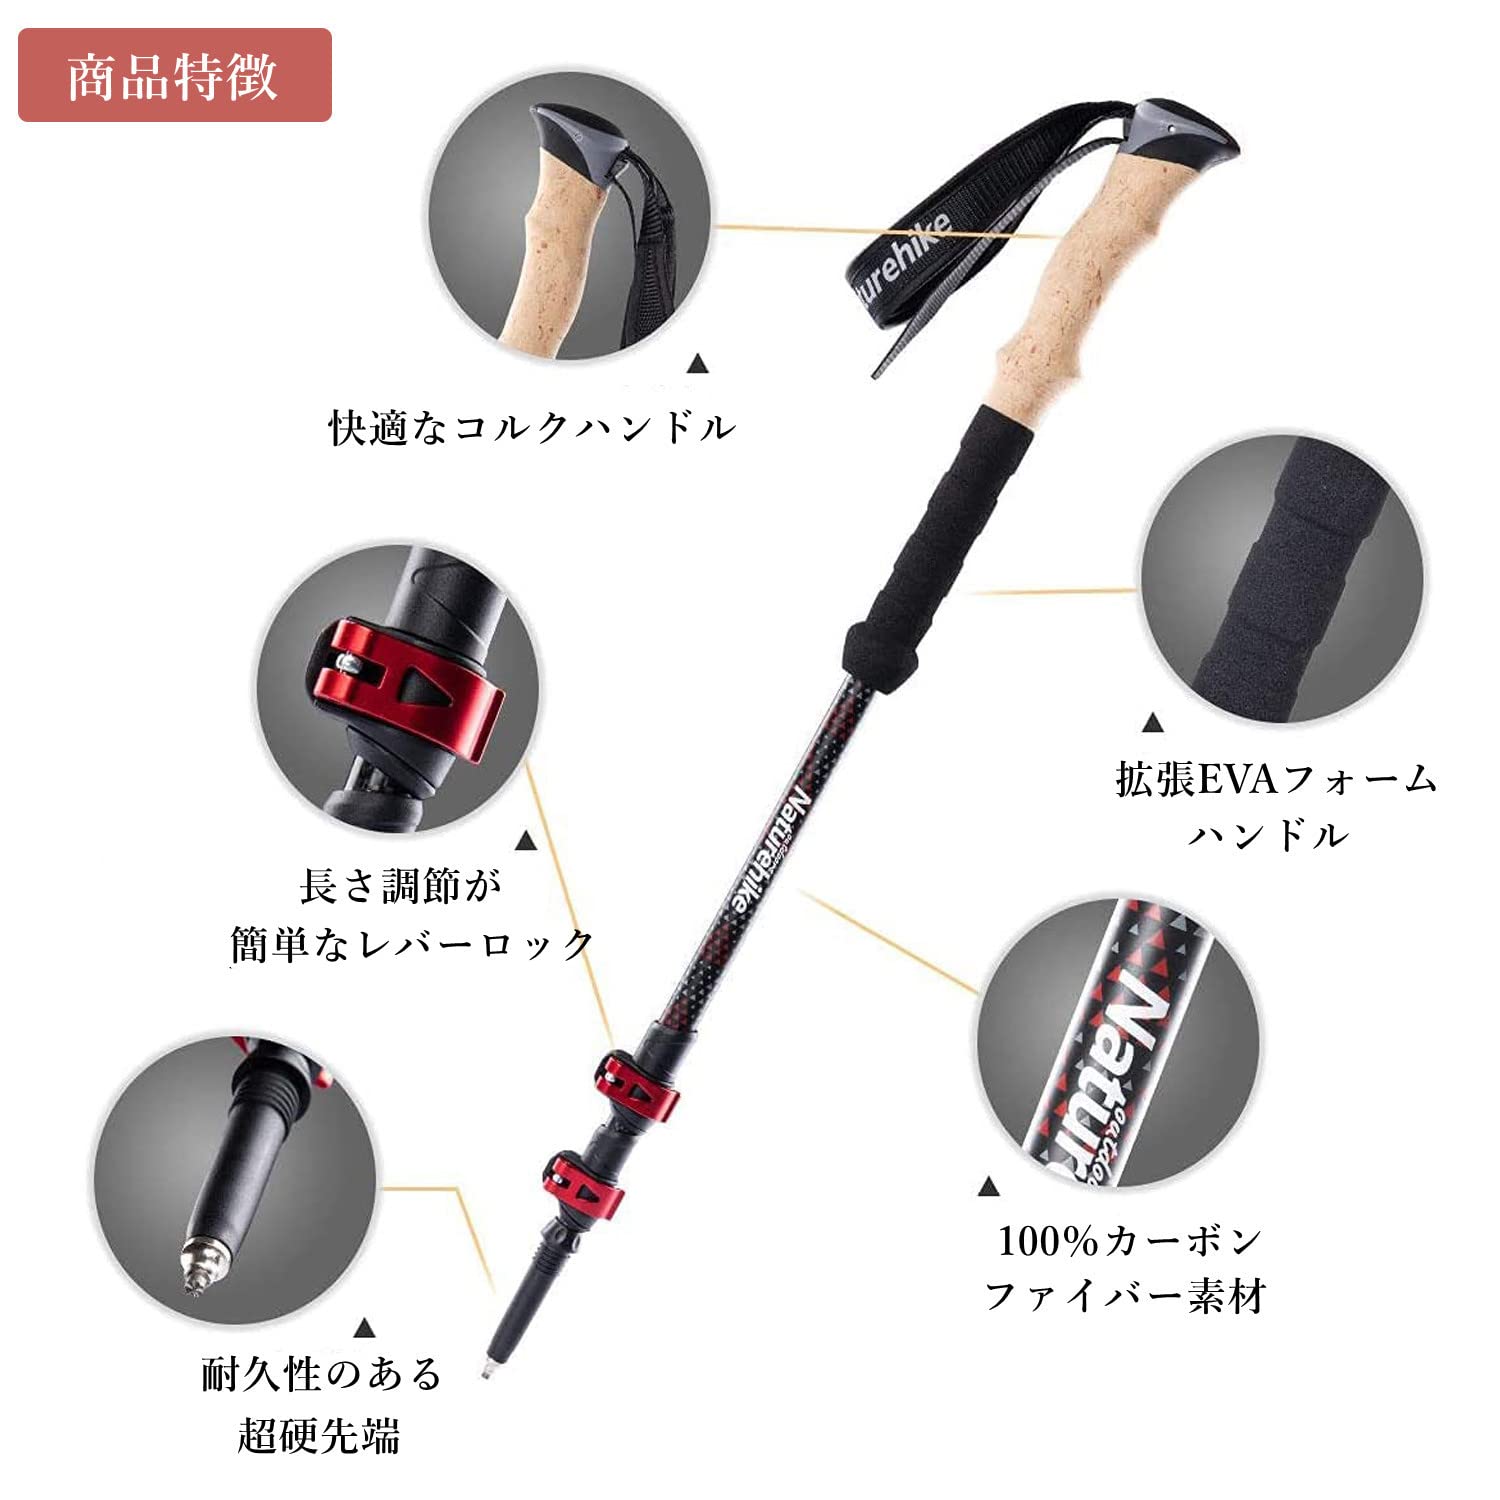 Naturehike Distant wind トレッキングポール カーボン製 超軽量 2本セット